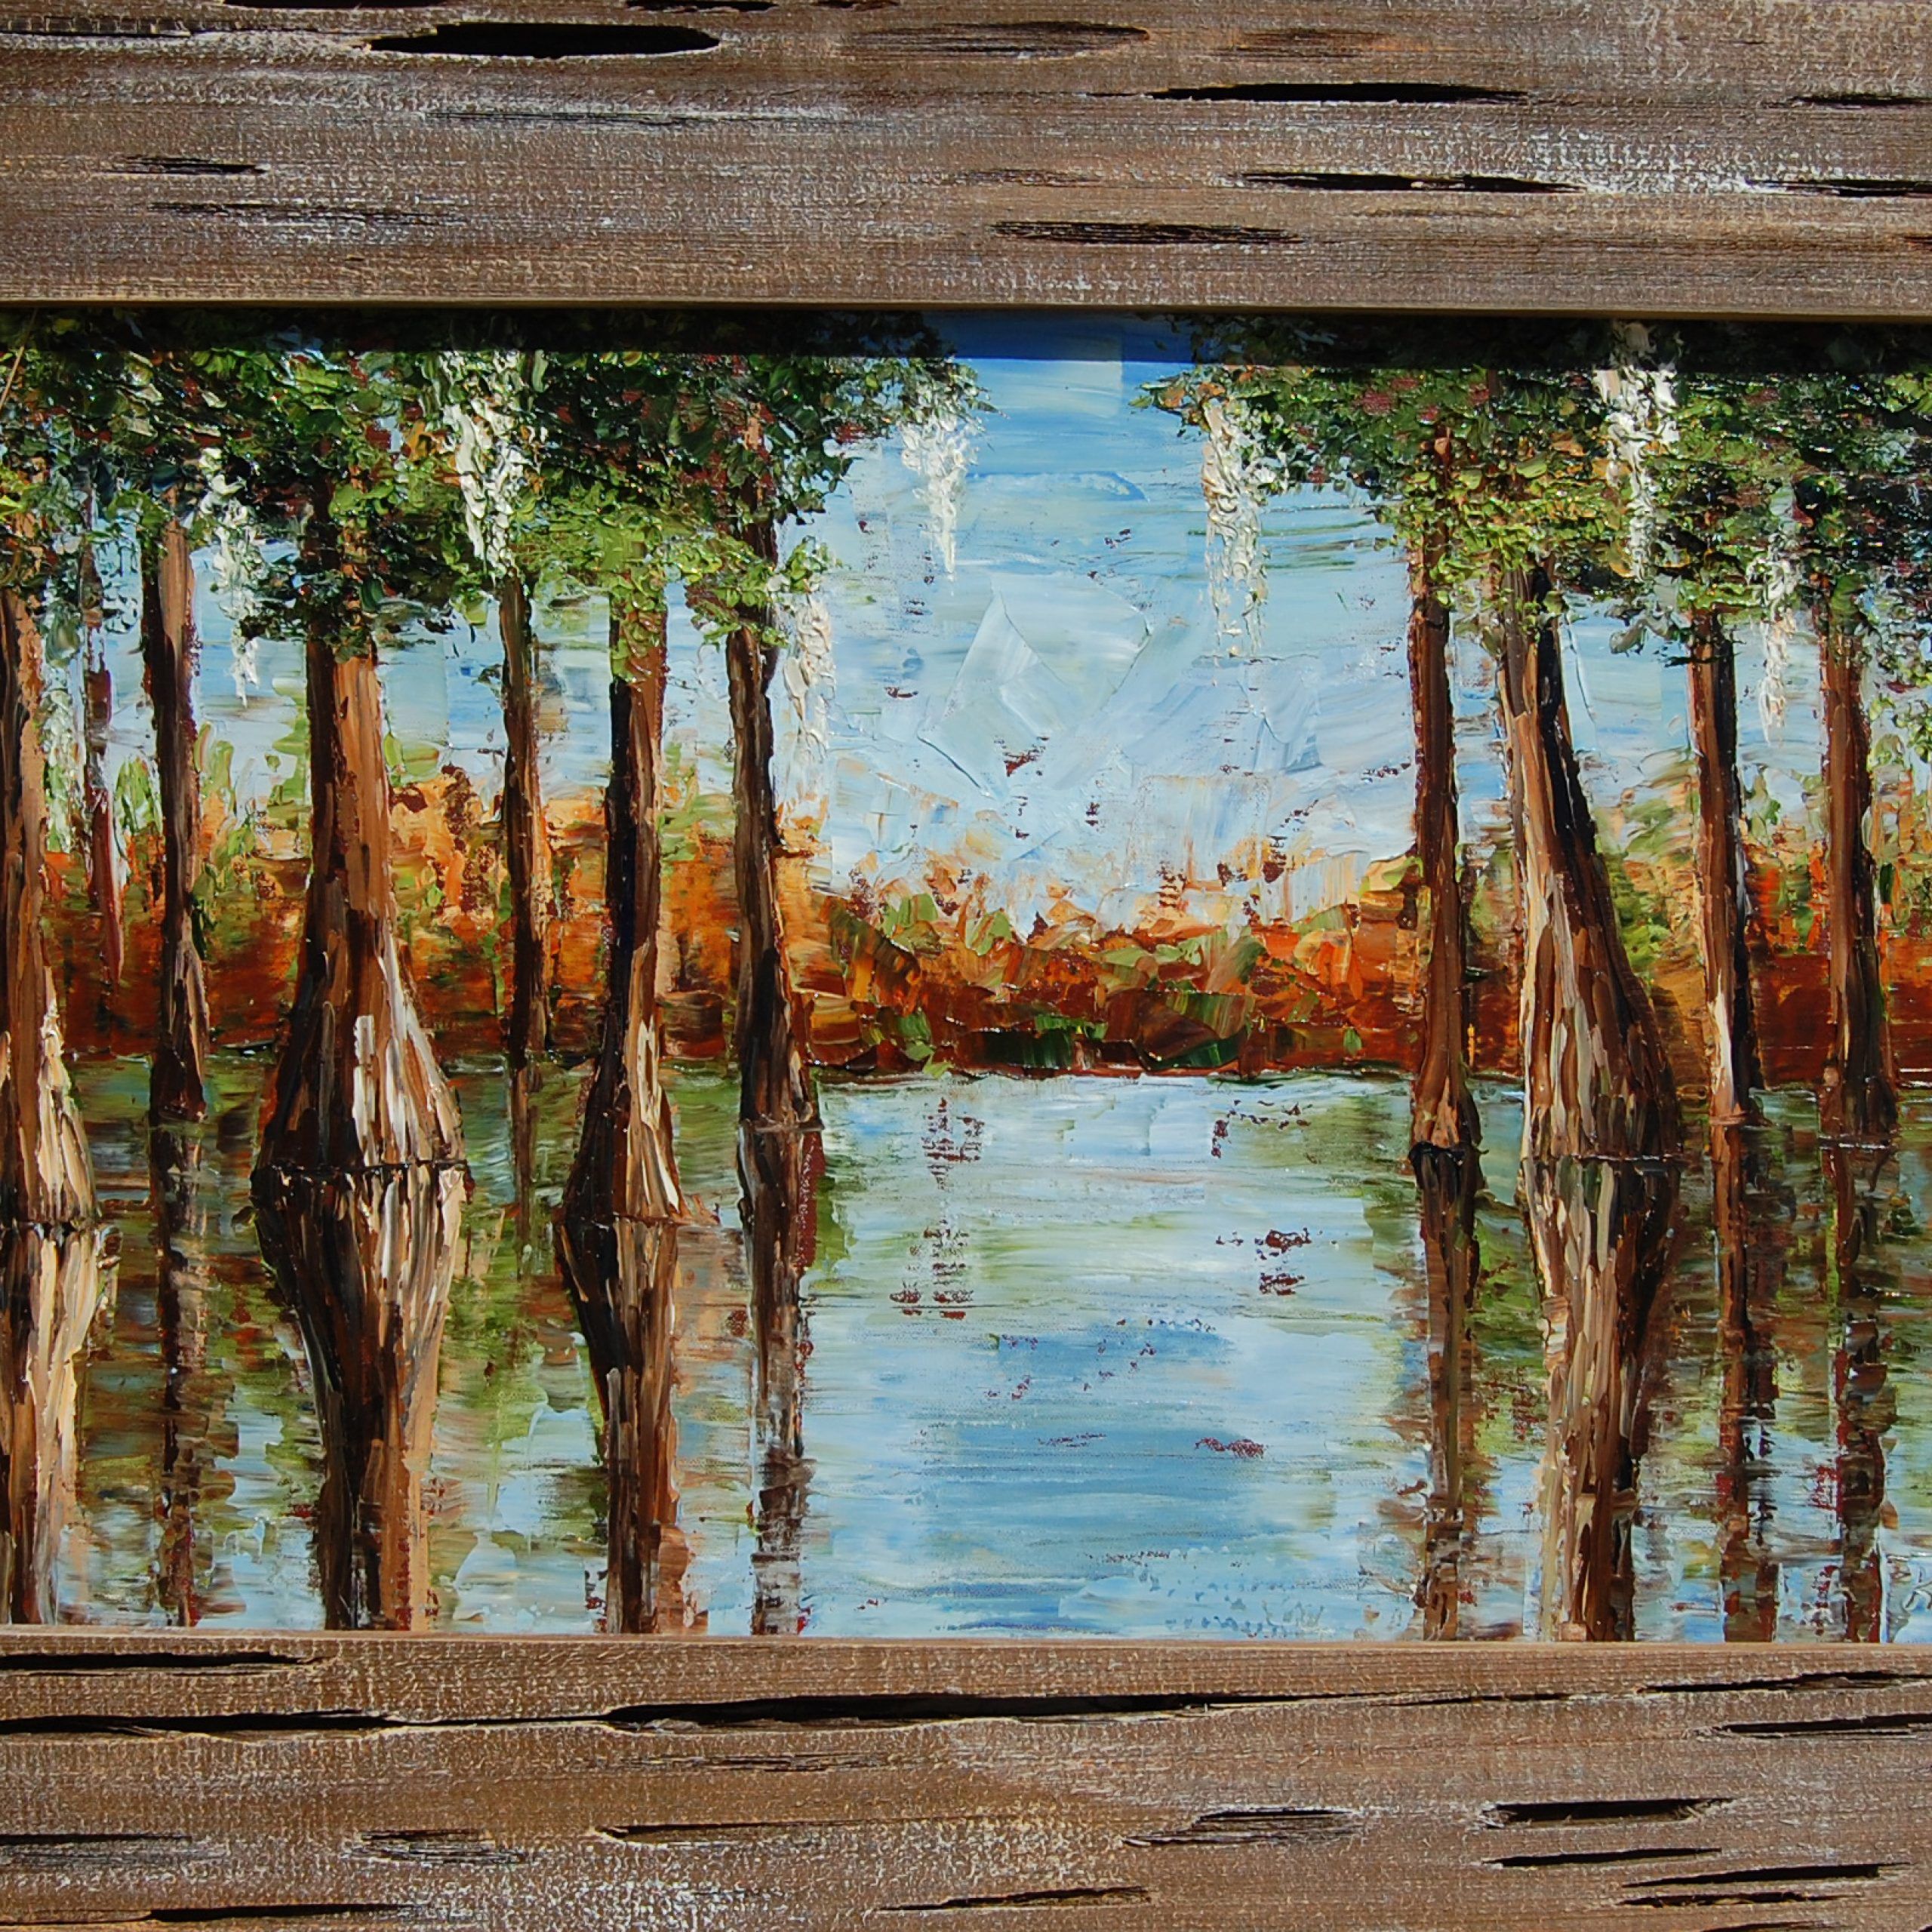 Cypress View 28X44 Framed In Custom Cypress Sold – Kathy Schumacher Art With Regard To Cypress Wall Art (View 2 of 15)